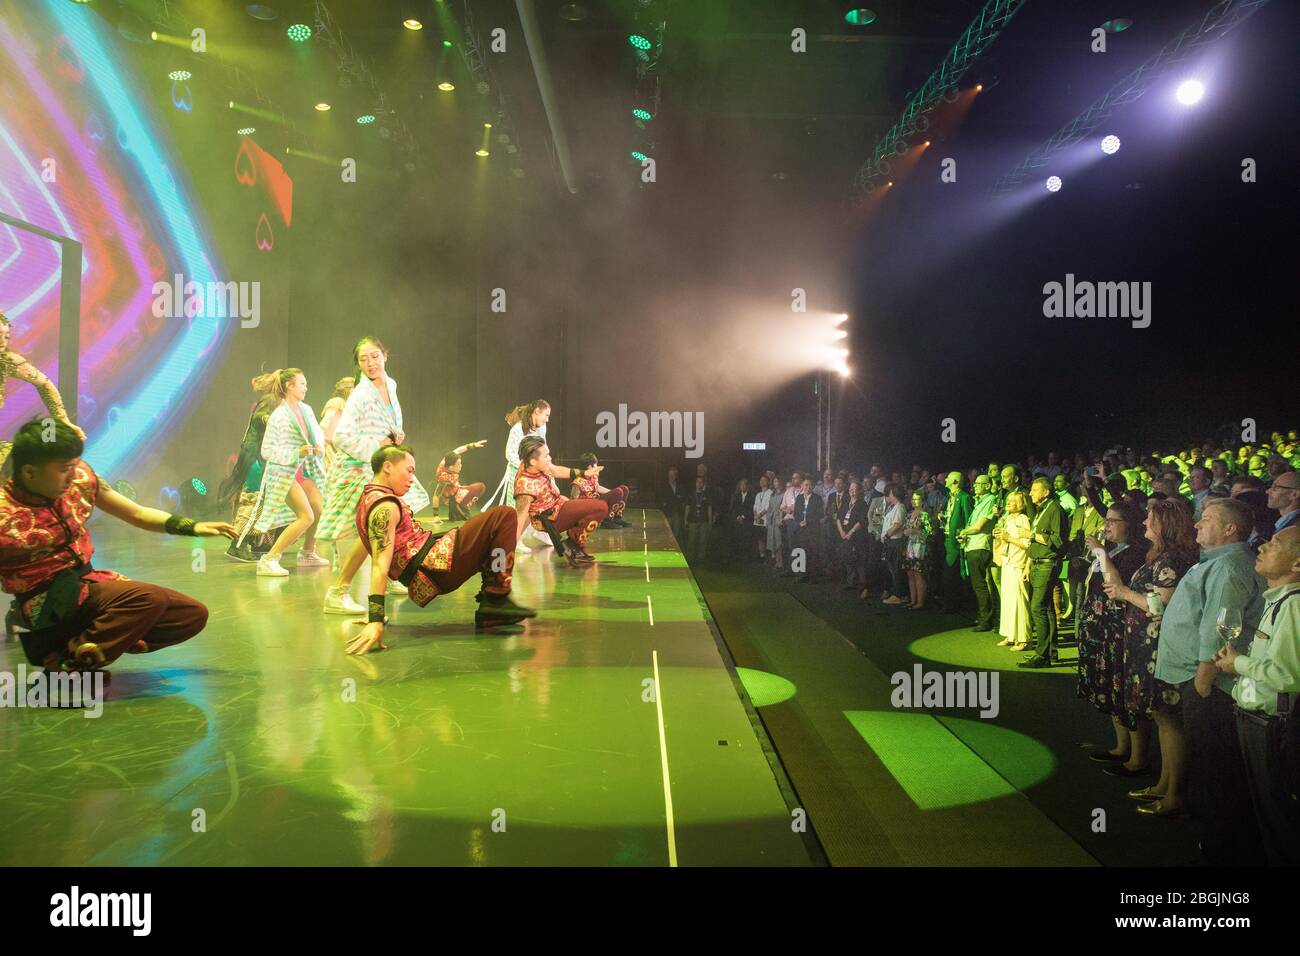 Chinese dancers perform for onstage as a large crowd looks on Stock Photo